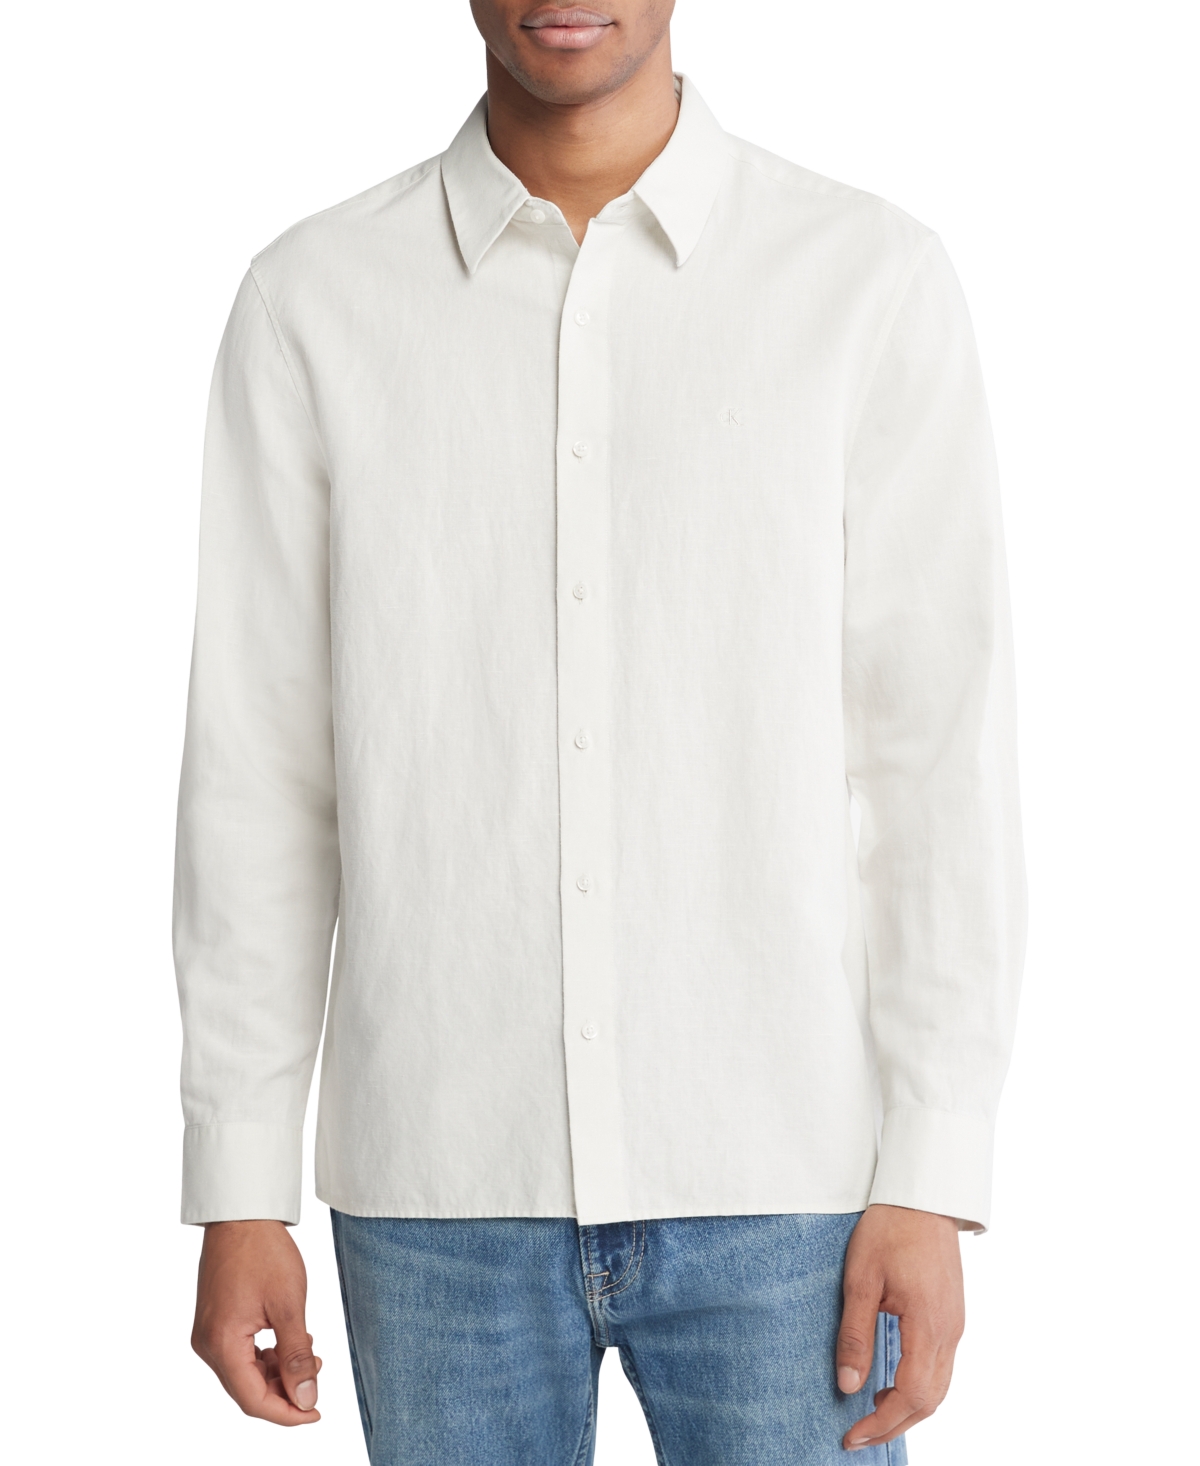 Men's Classic-Fit Textured Button-Down Shirt - White Onyx